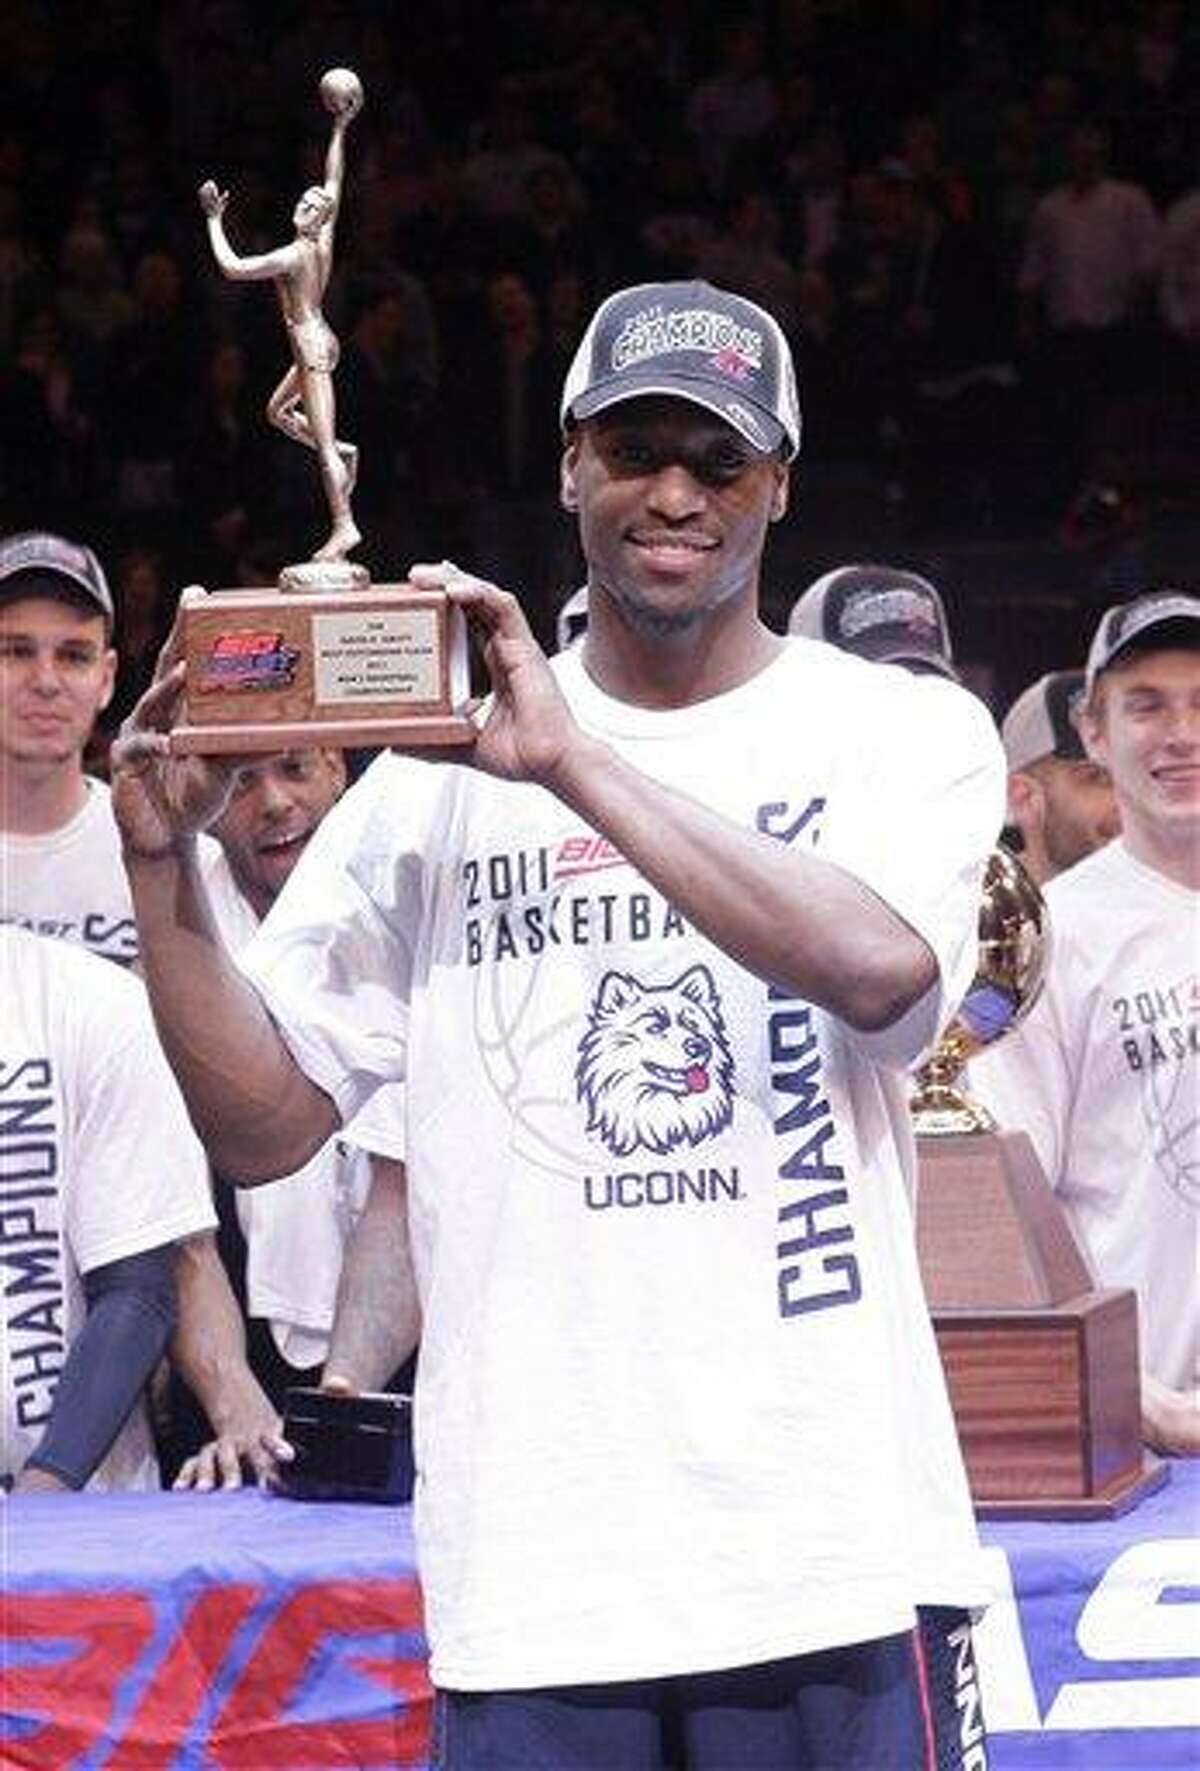 Connecticut's Kemba Walker (15) holds the Most Outstanding Player trophy after an NCAA college basketball game against Louisville at the Big East championship, Saturday, March 12, 2011, in New York. Connecticut won the game 69-66. Walker scored 19 points. (AP Photo/Frank Franklin II)